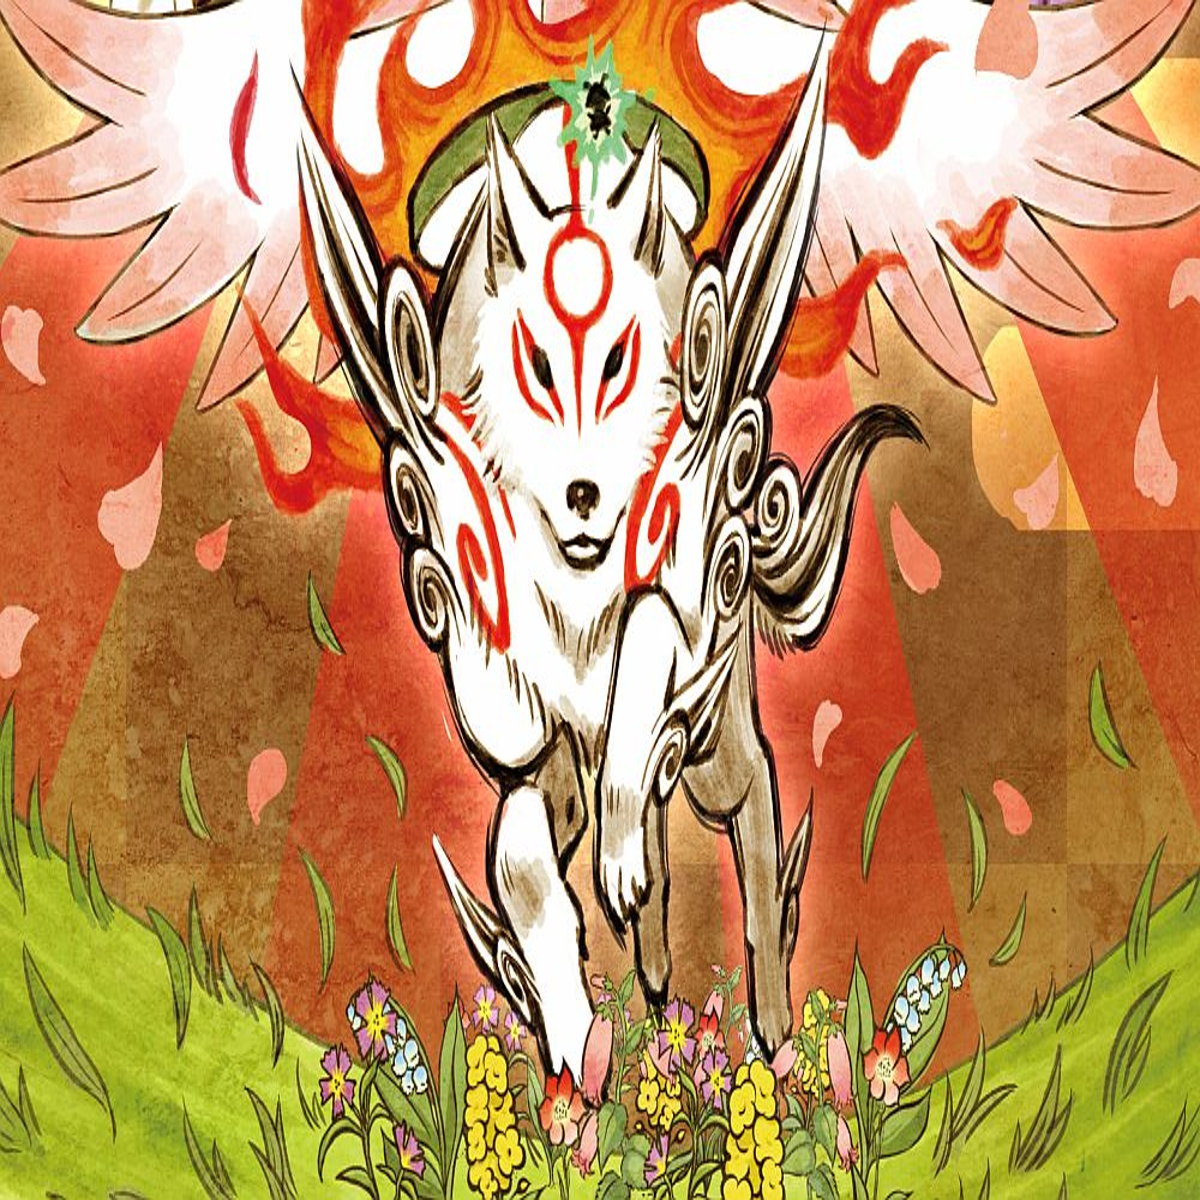 Okami HD' arrives on Nintendo Switch this summer